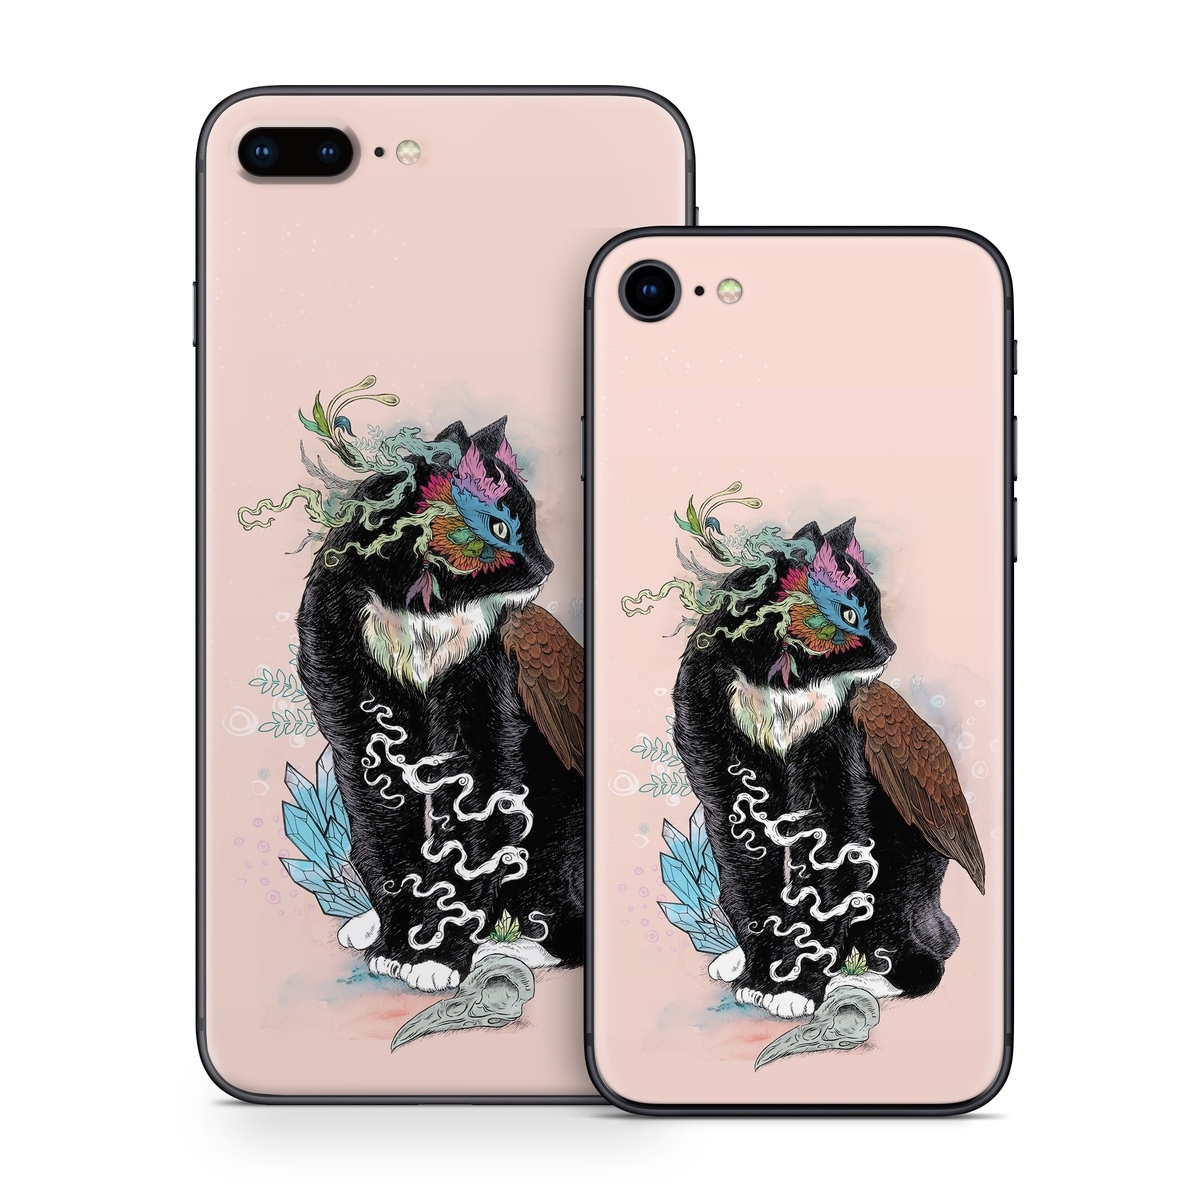  Skin design of Illustration, Owl, Art, Graphic design, Cat, Tail, with pink, black, brown, red, green colors